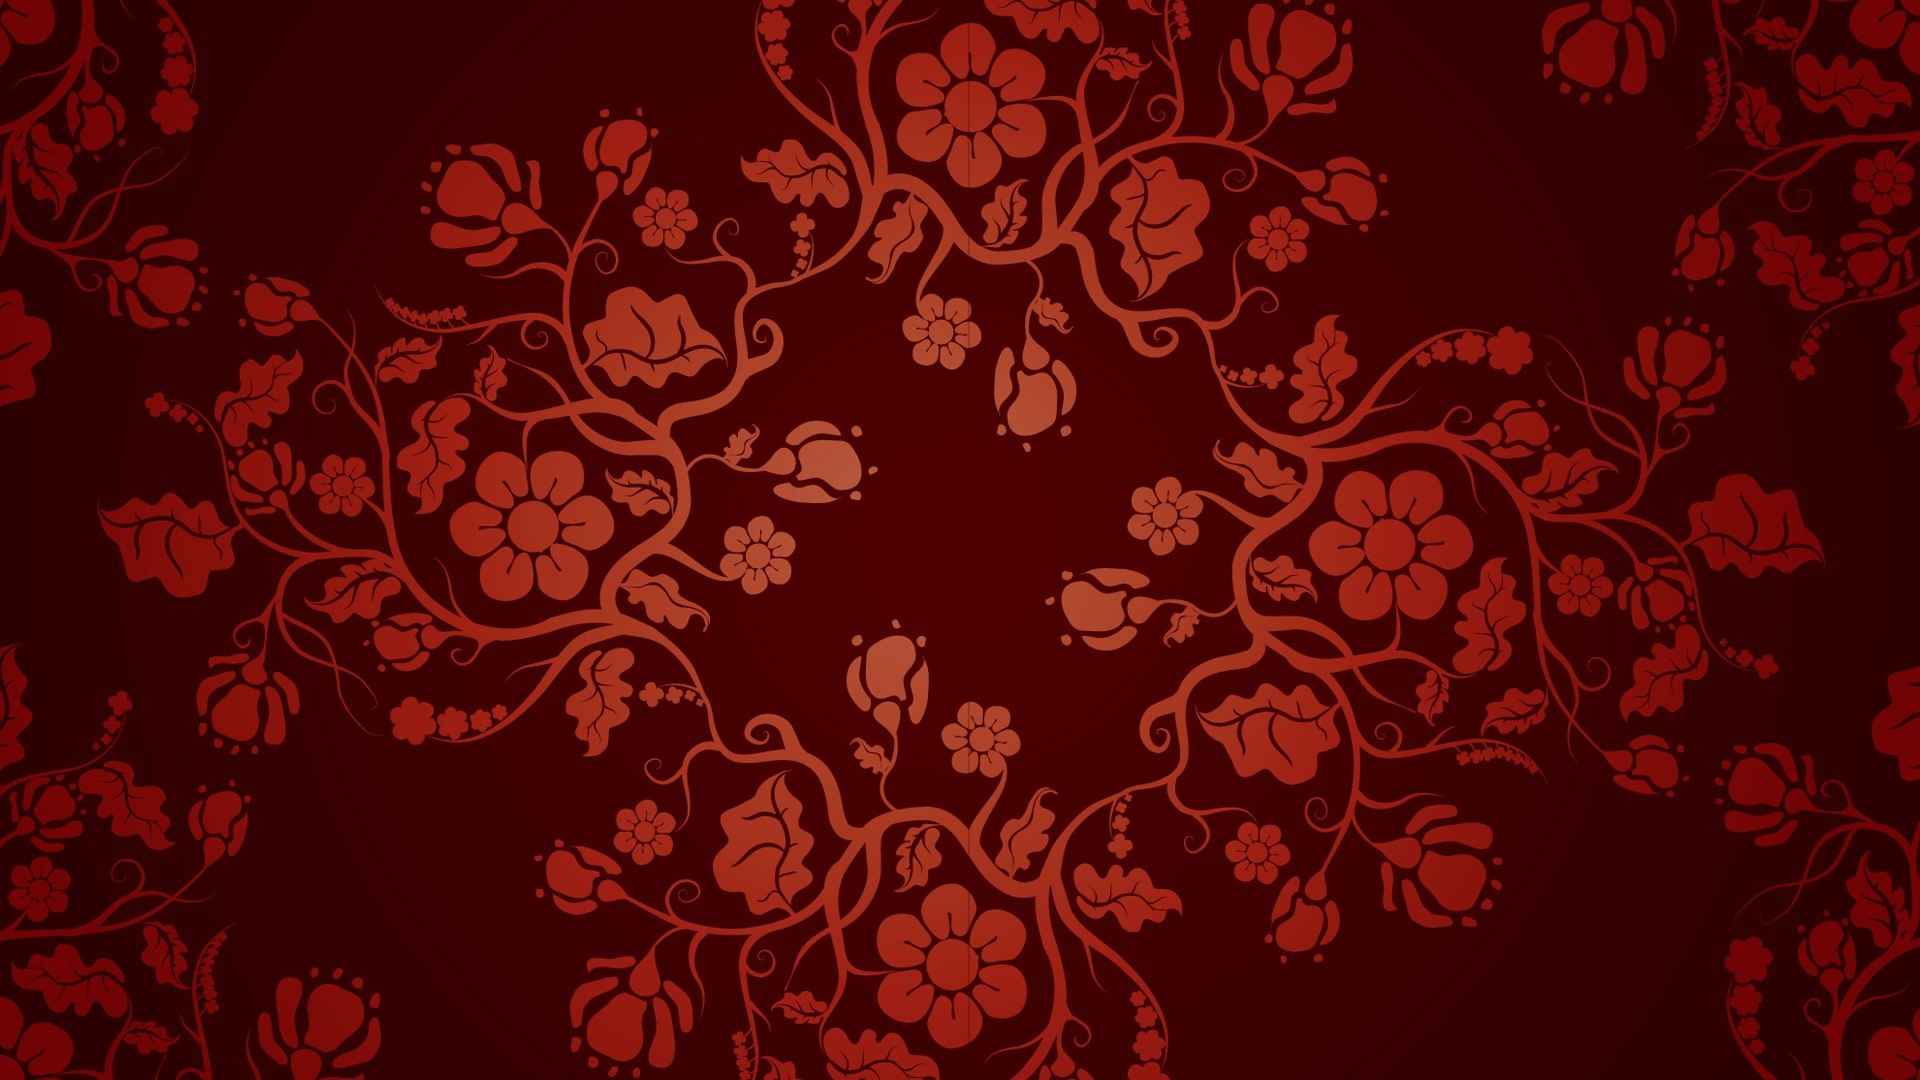 chinese pattern wallpaper,red,pattern,maroon,brown,floral design